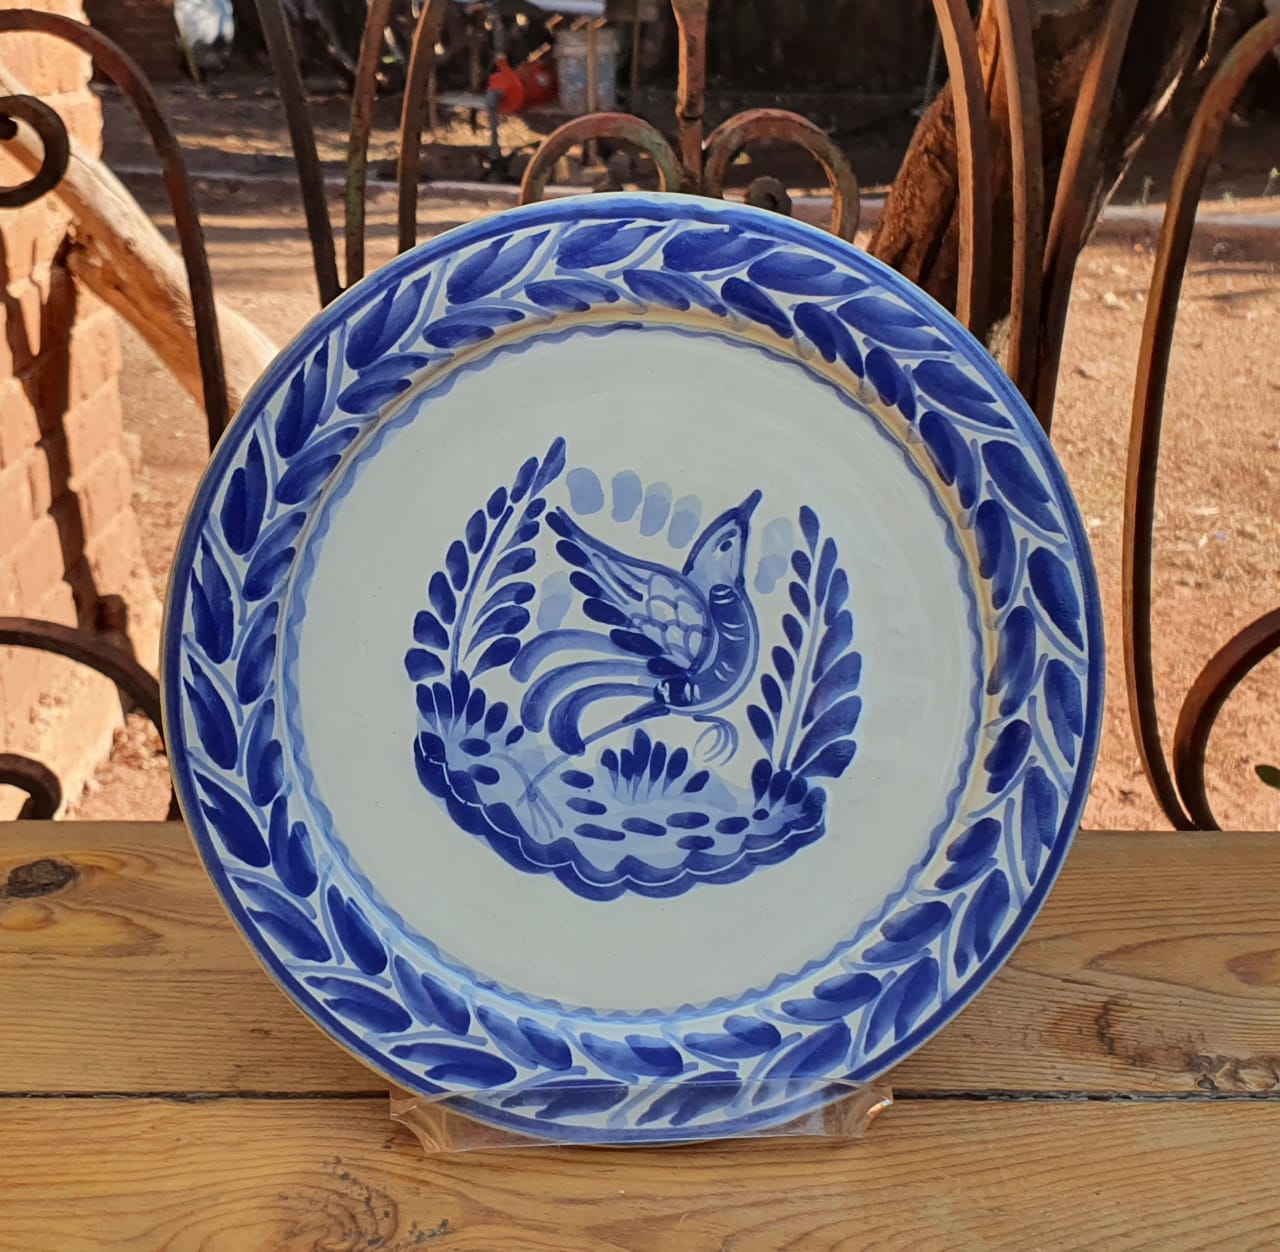 Bird Plates Blue and White